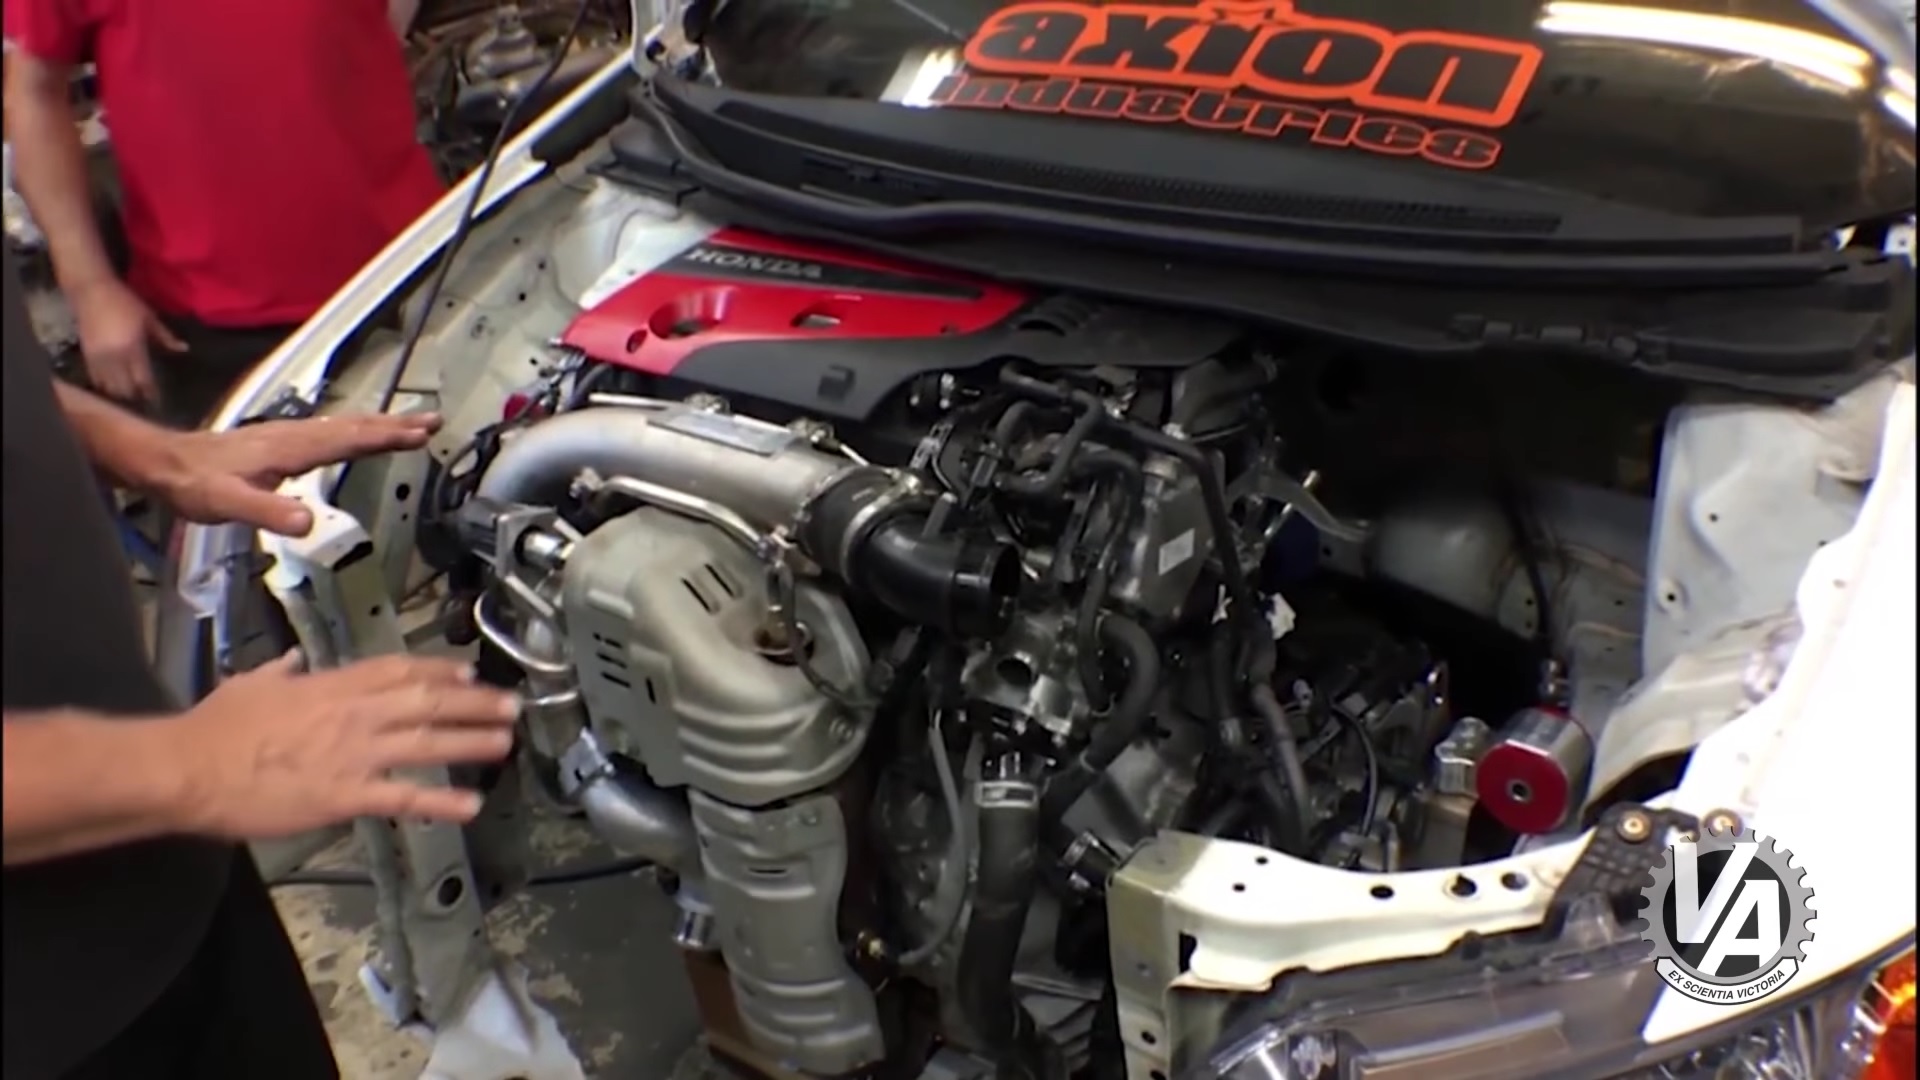 2018 Civic Type R motor in 9th Gen Civic